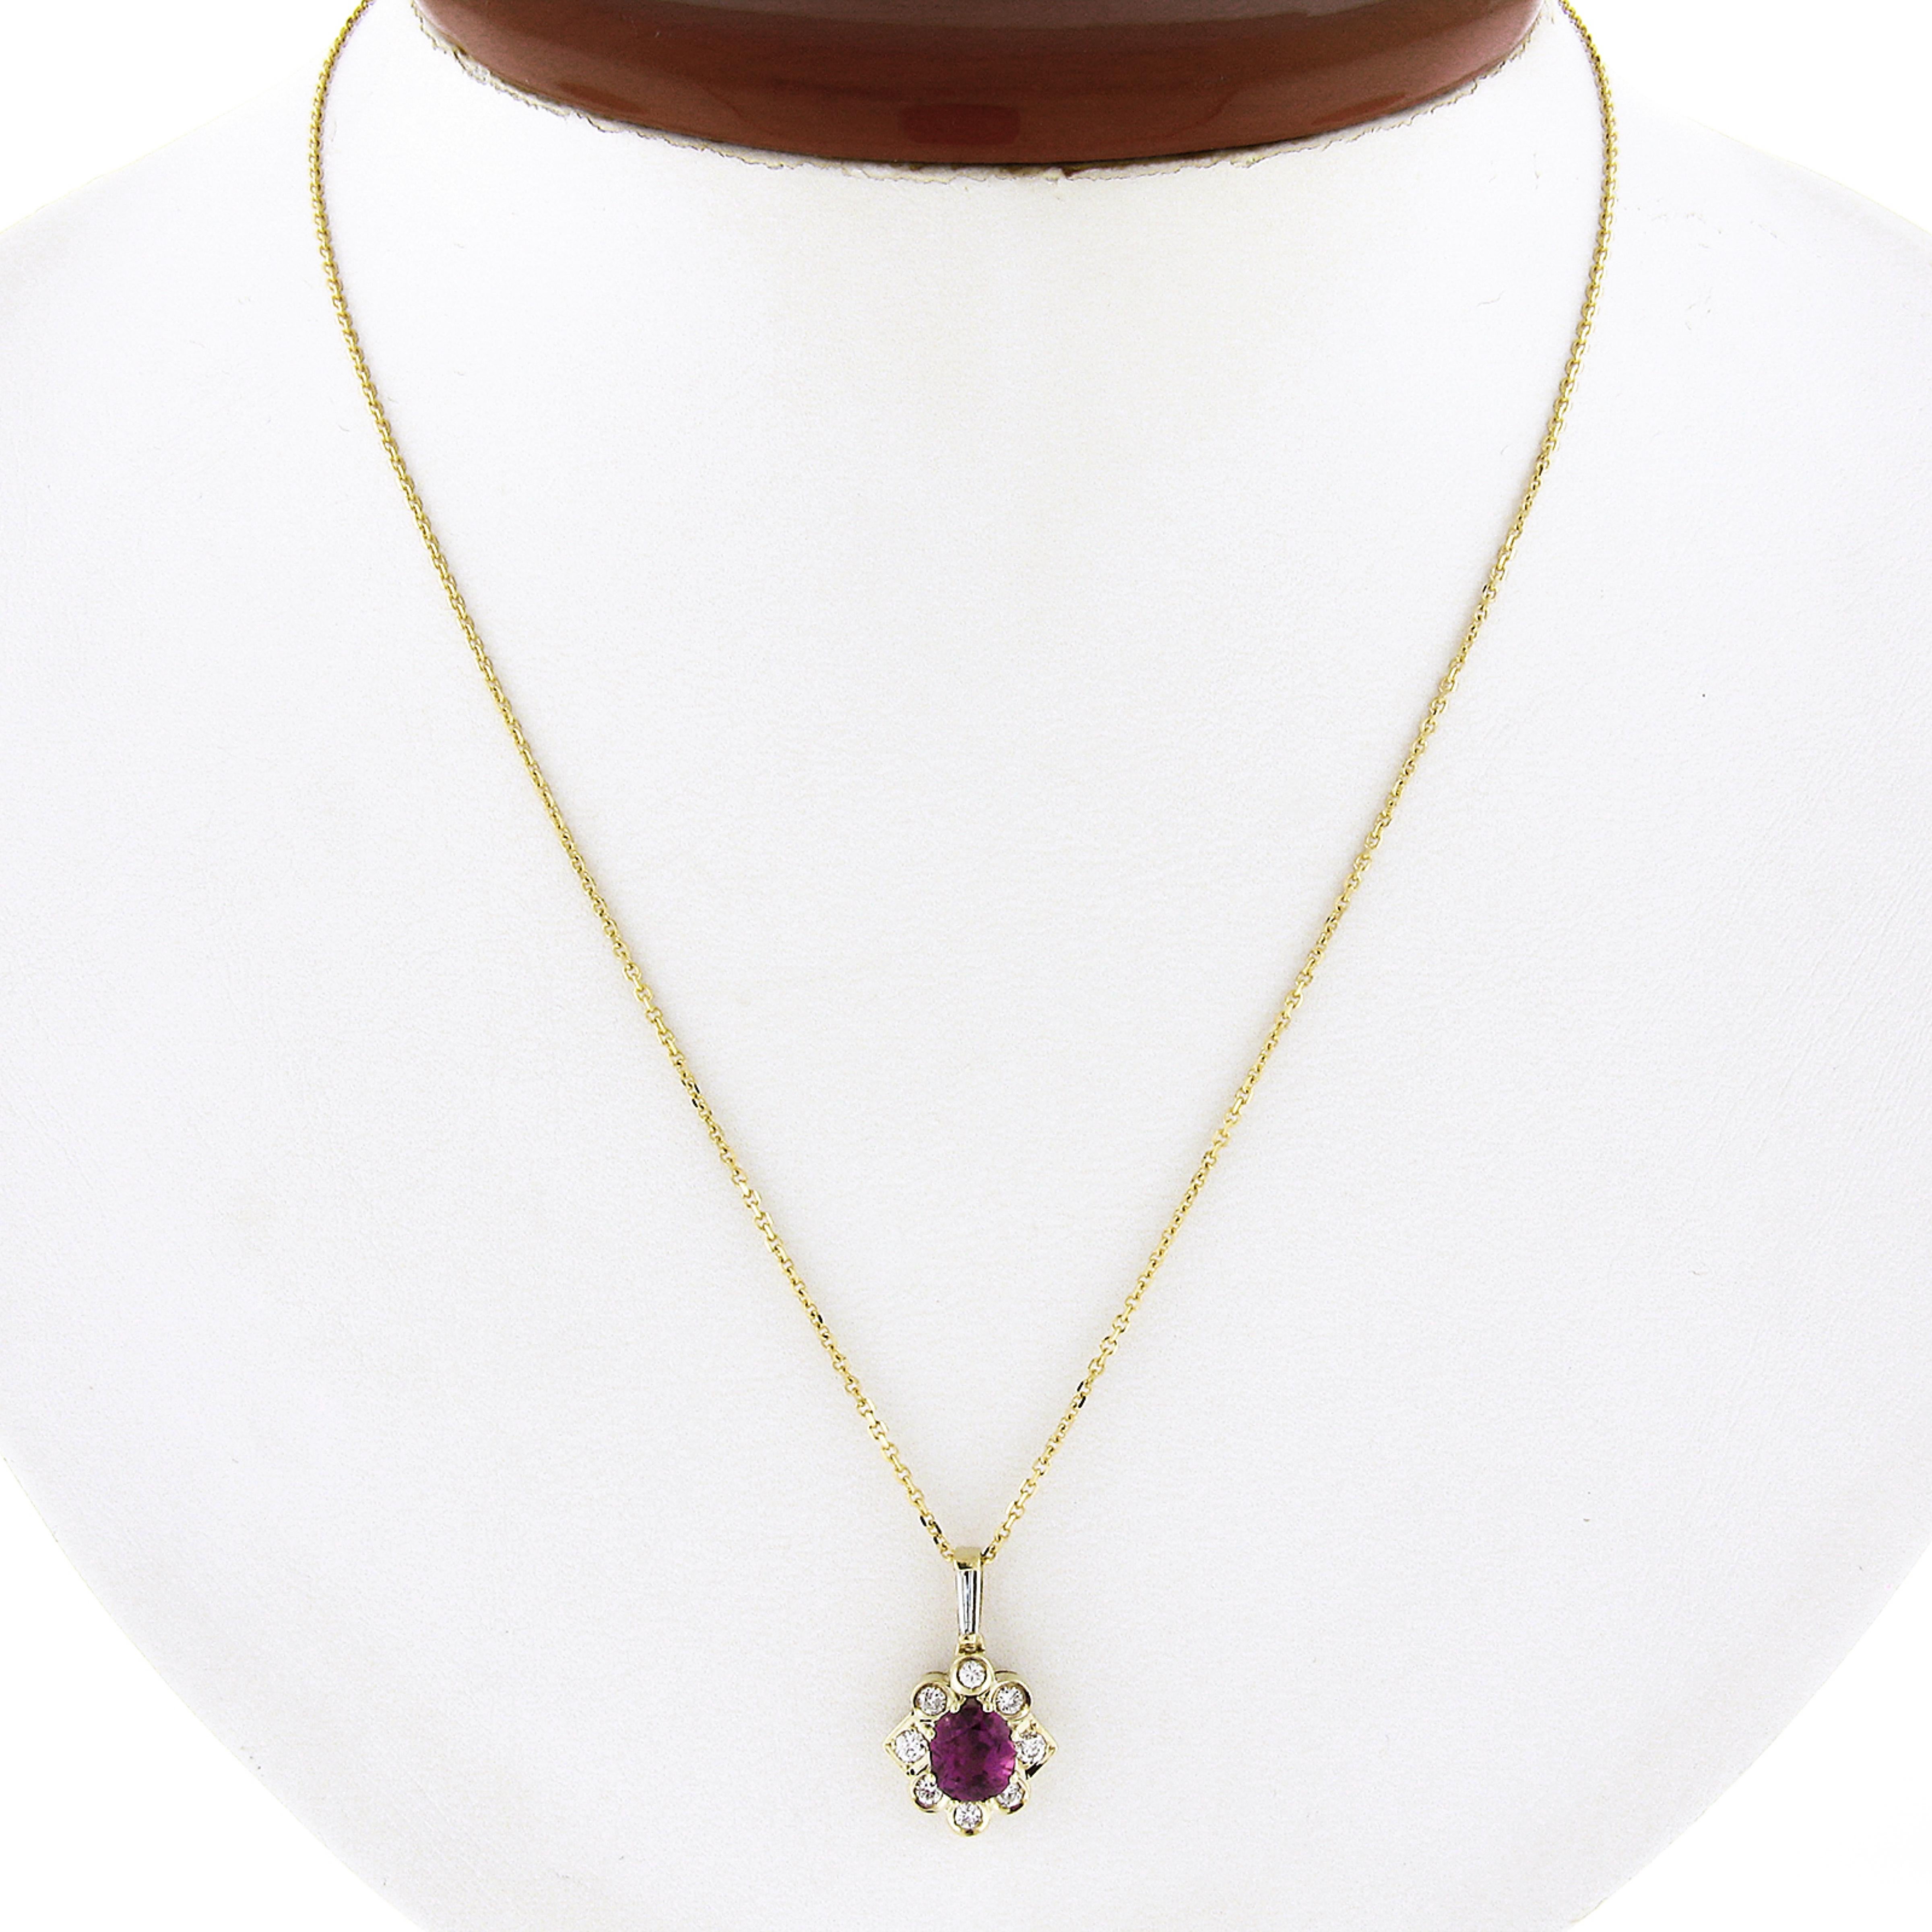 This beautiful pendant is crafted in solid 18k yellow gold with a 14k yellow gold cable link chain. It features a gorgeous oval stone tested as natural ruby or spinel that is pinkish red in color and neatly prong set at the center and further